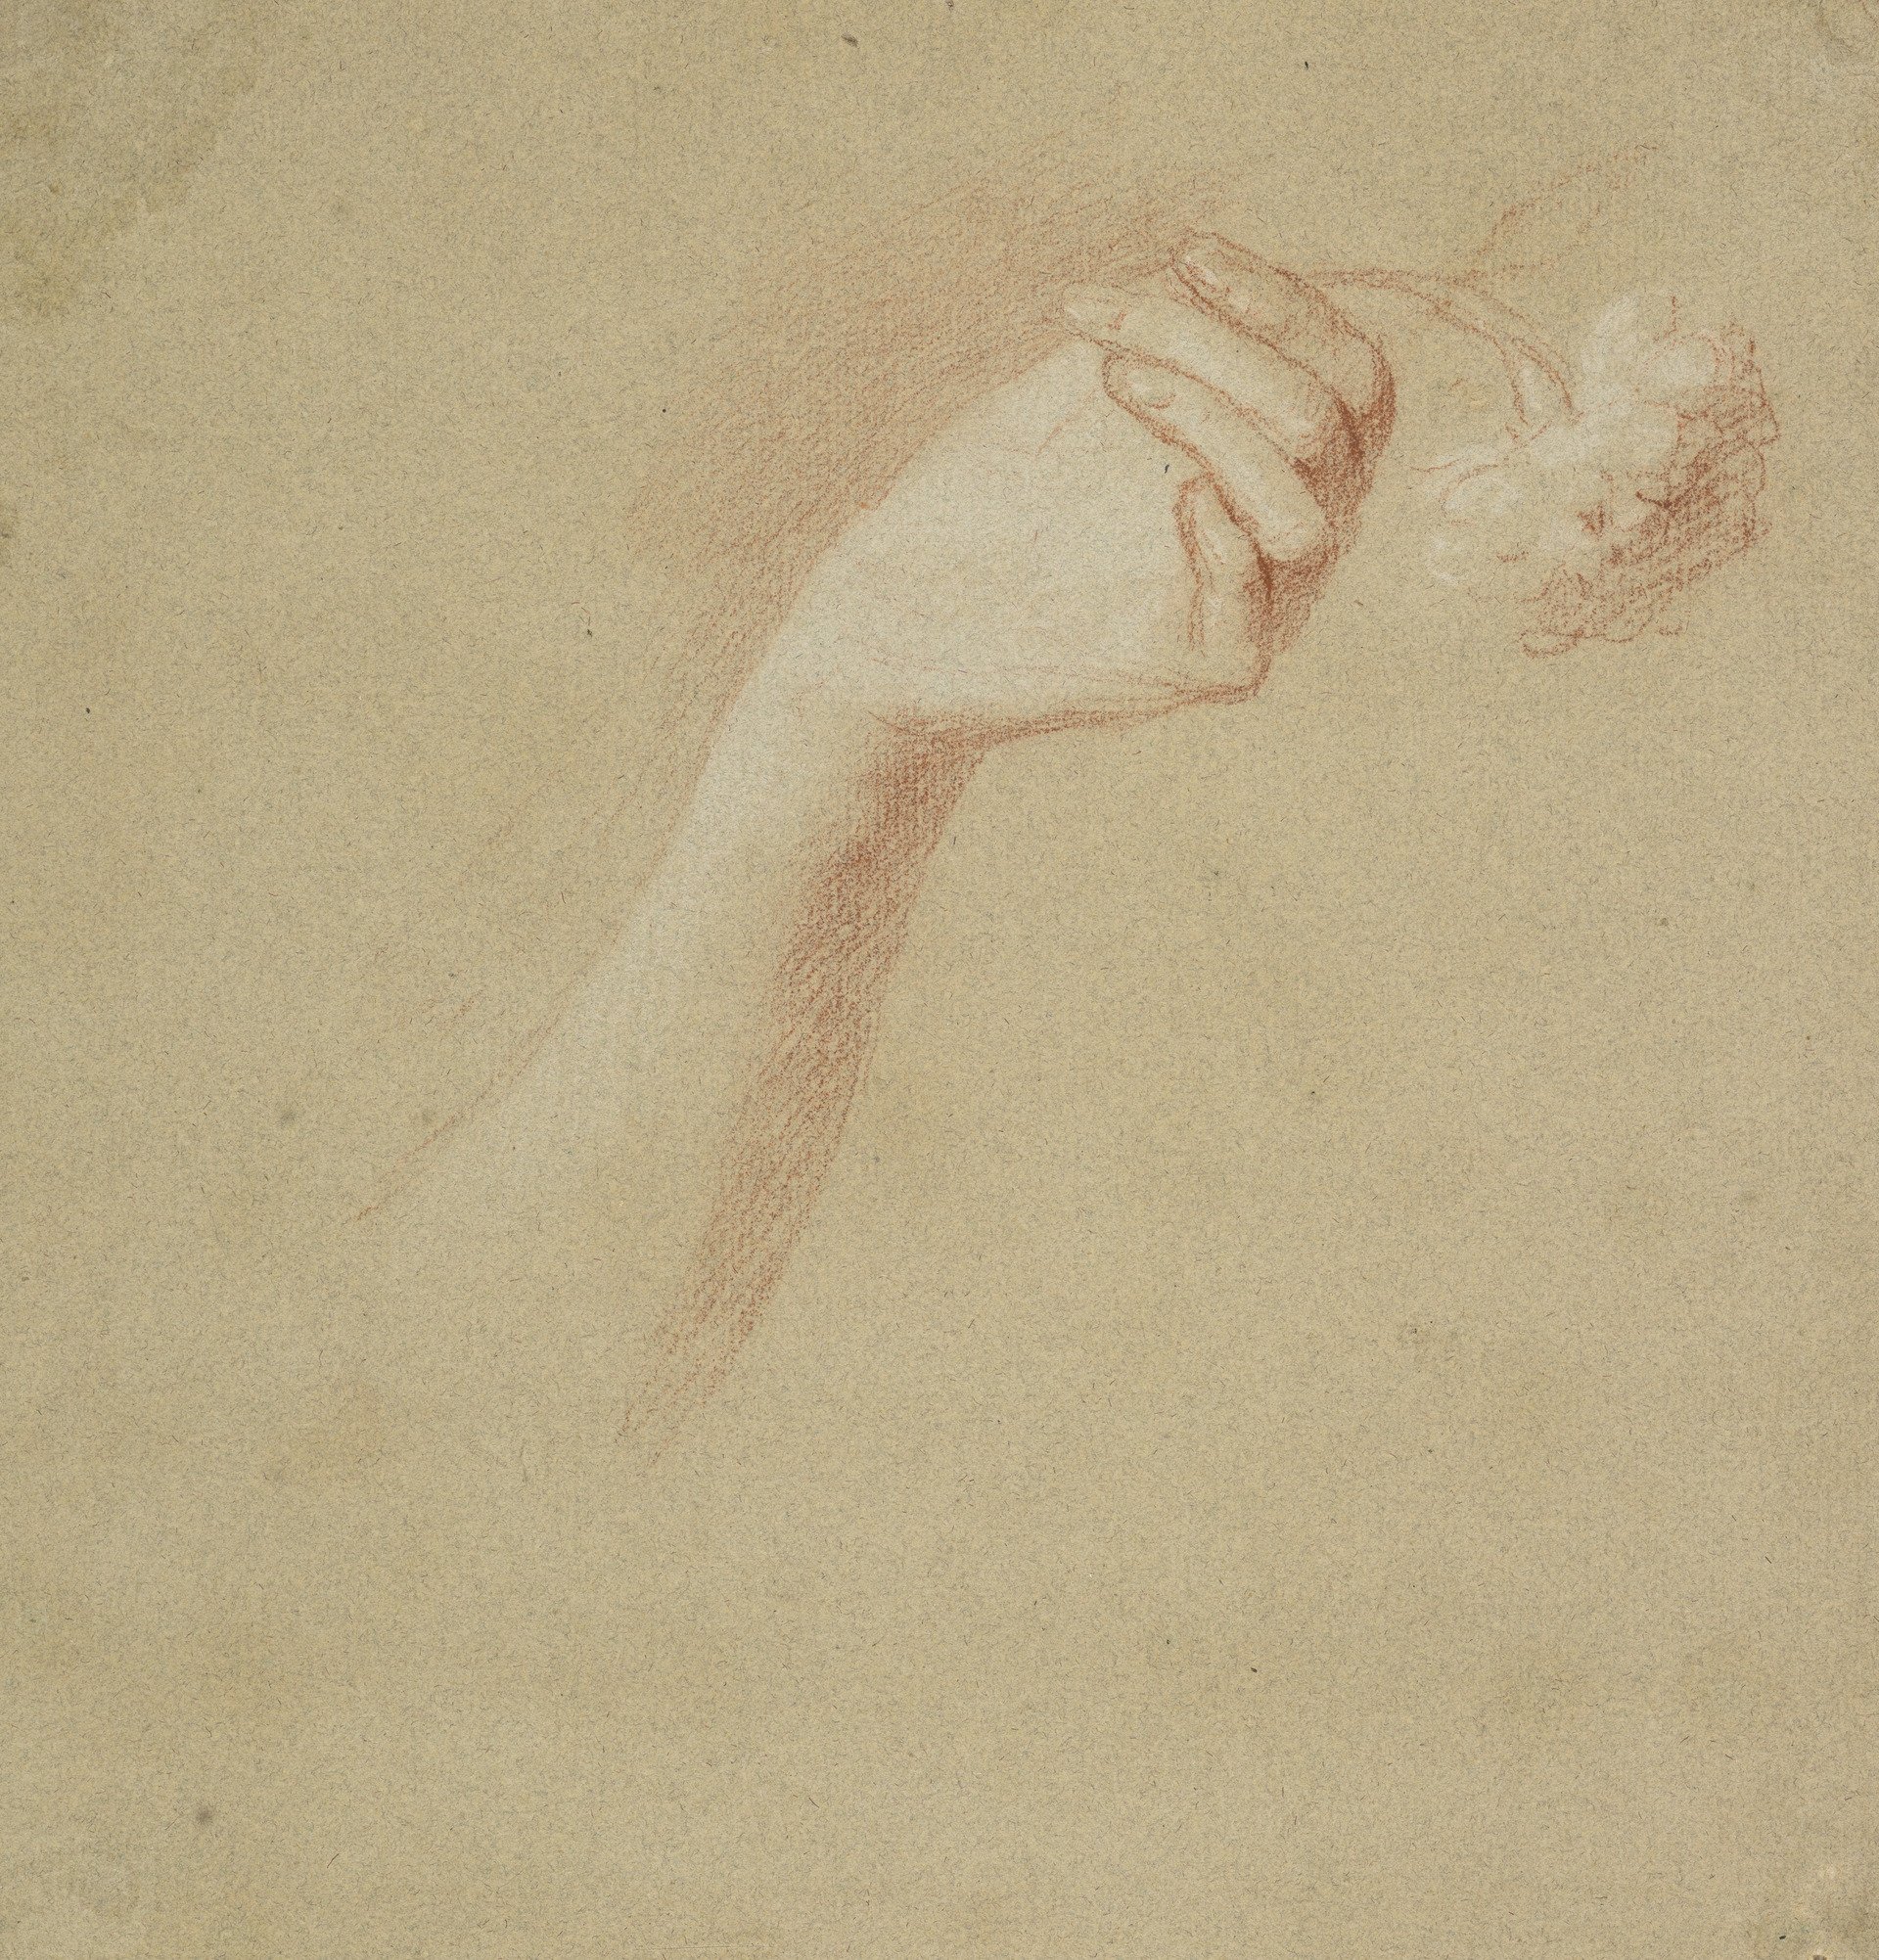 Allan Ramsay, A Lady's Left Hand Holding a Rose, c. 1758 - 1760. Red and white chalk on buff paper, 19.40 x 18.70 cm. Courtesy National Galleries Scotland, Edinburgh.